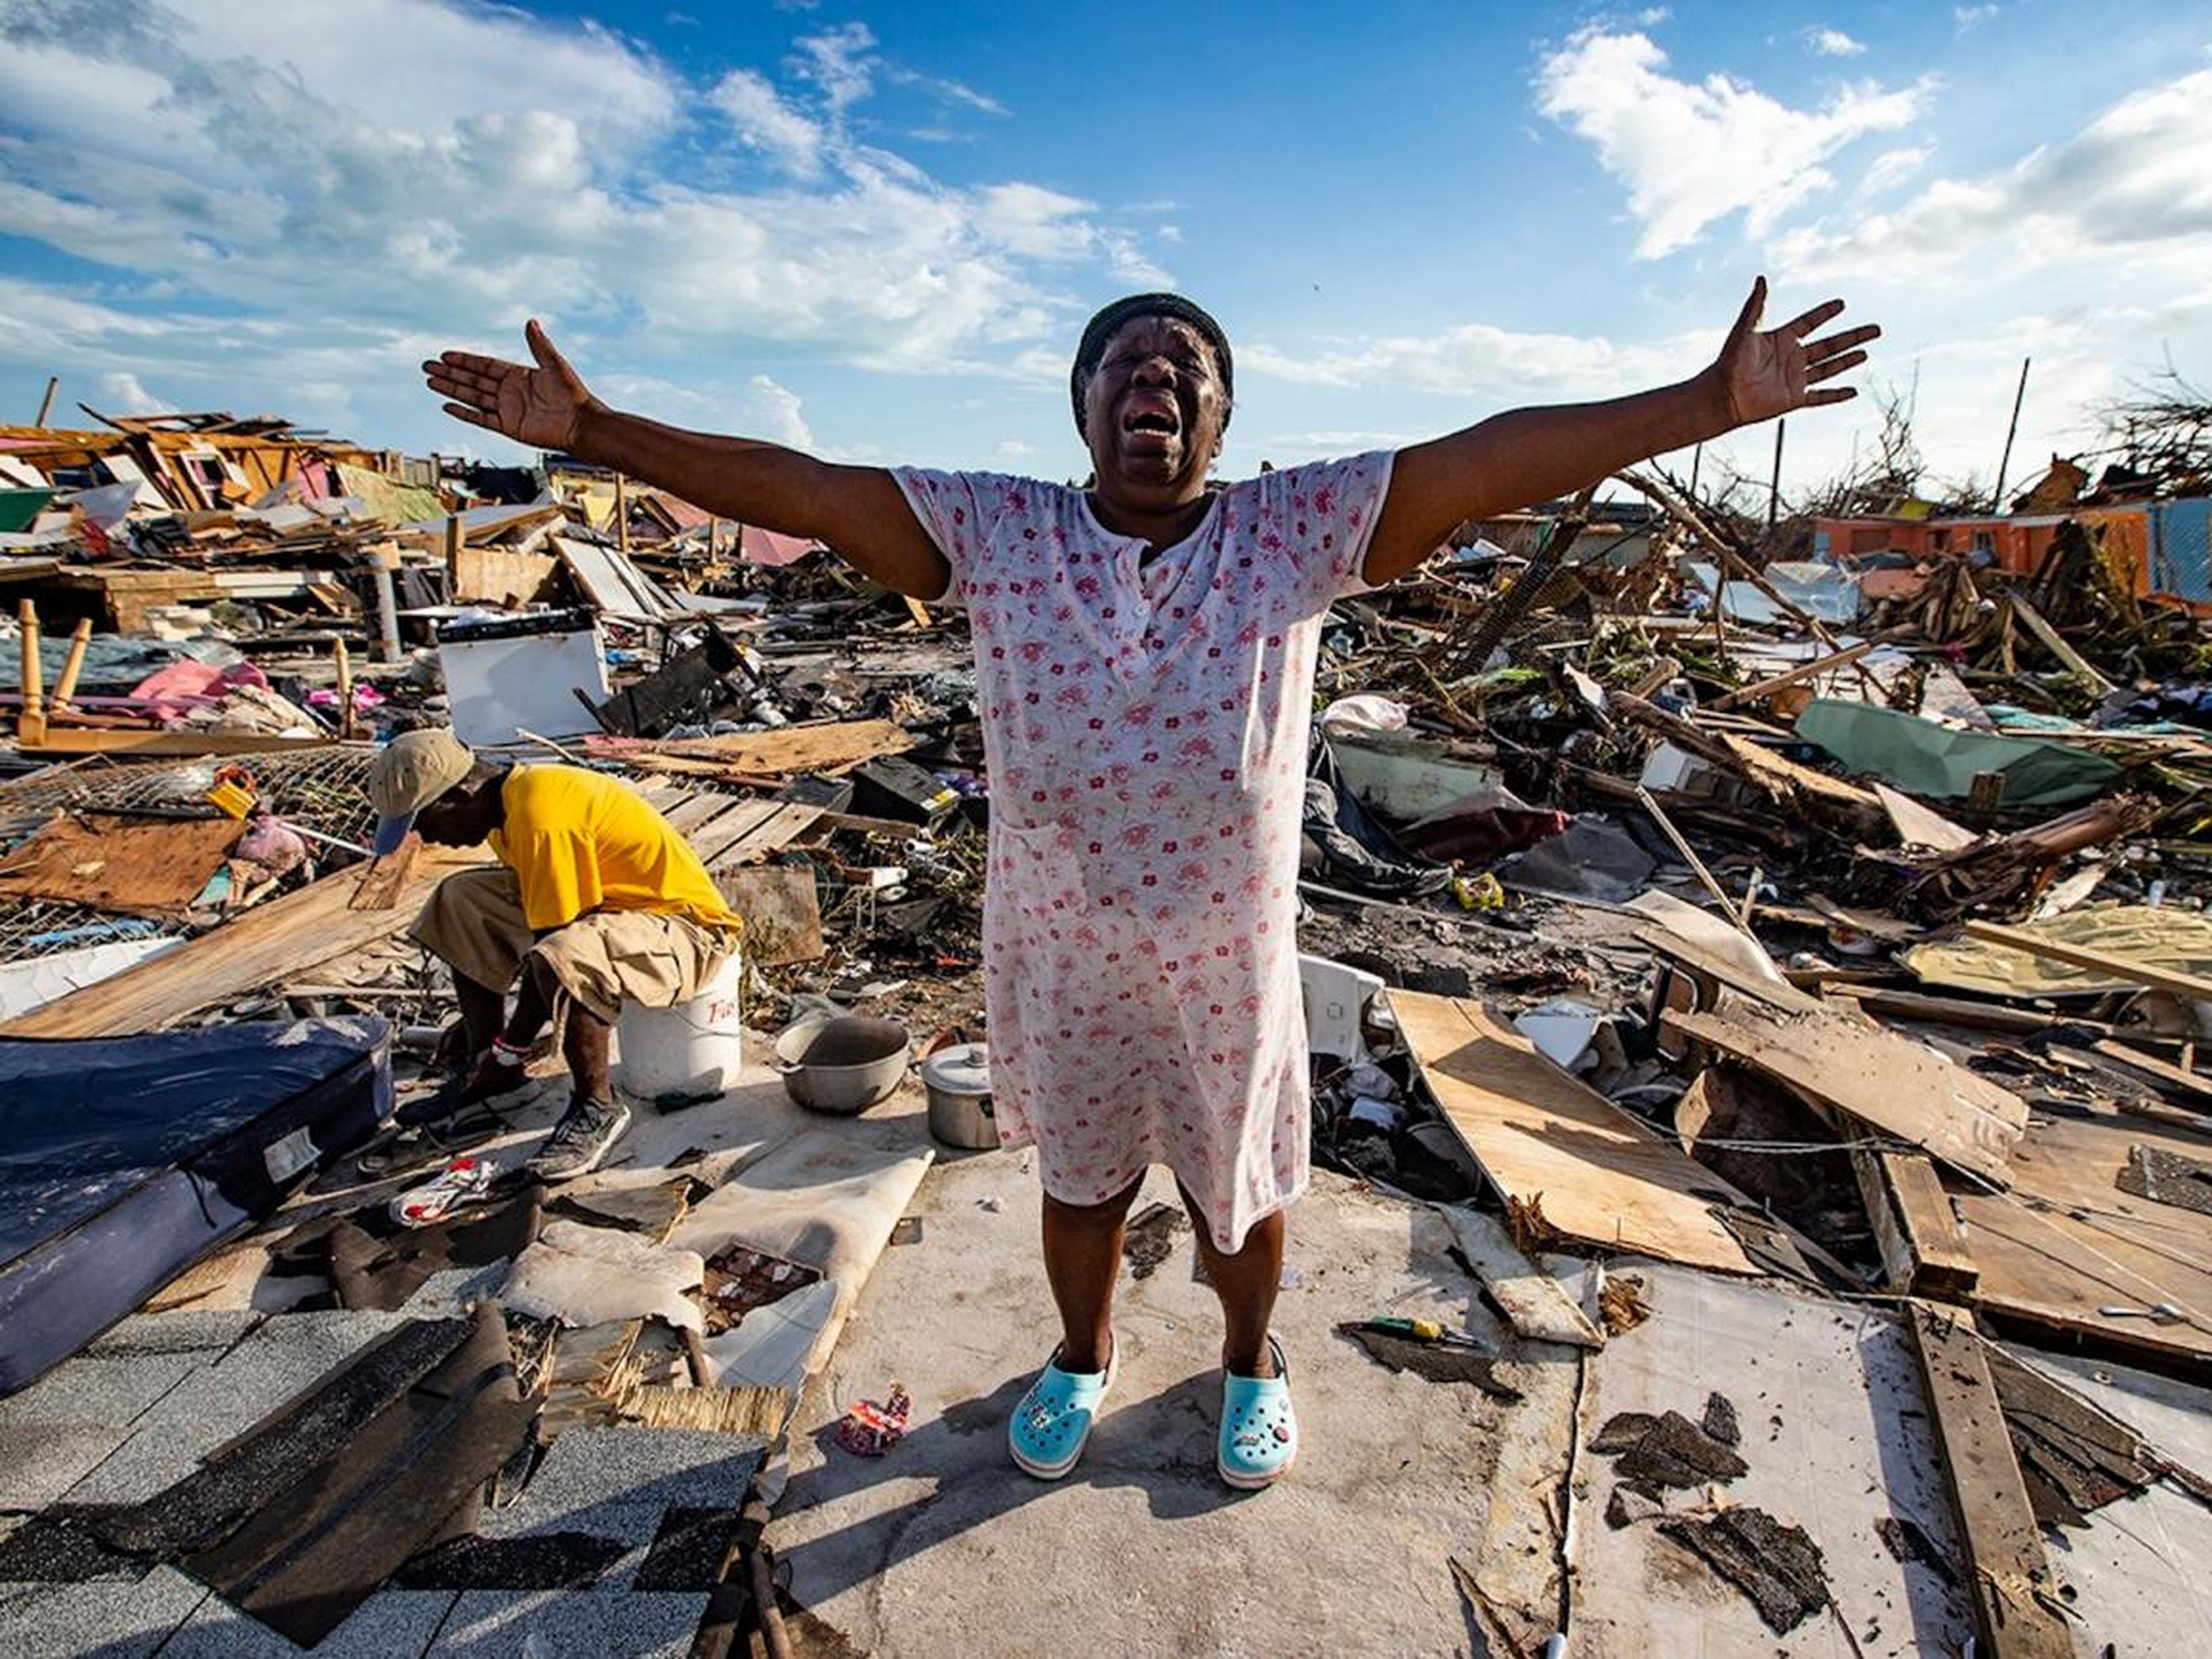 When storms are slower, their forceful winds, heavy rain, and surging tides have much more time to cause destruction. In the Bahamas, Dorian leveled entire towns.